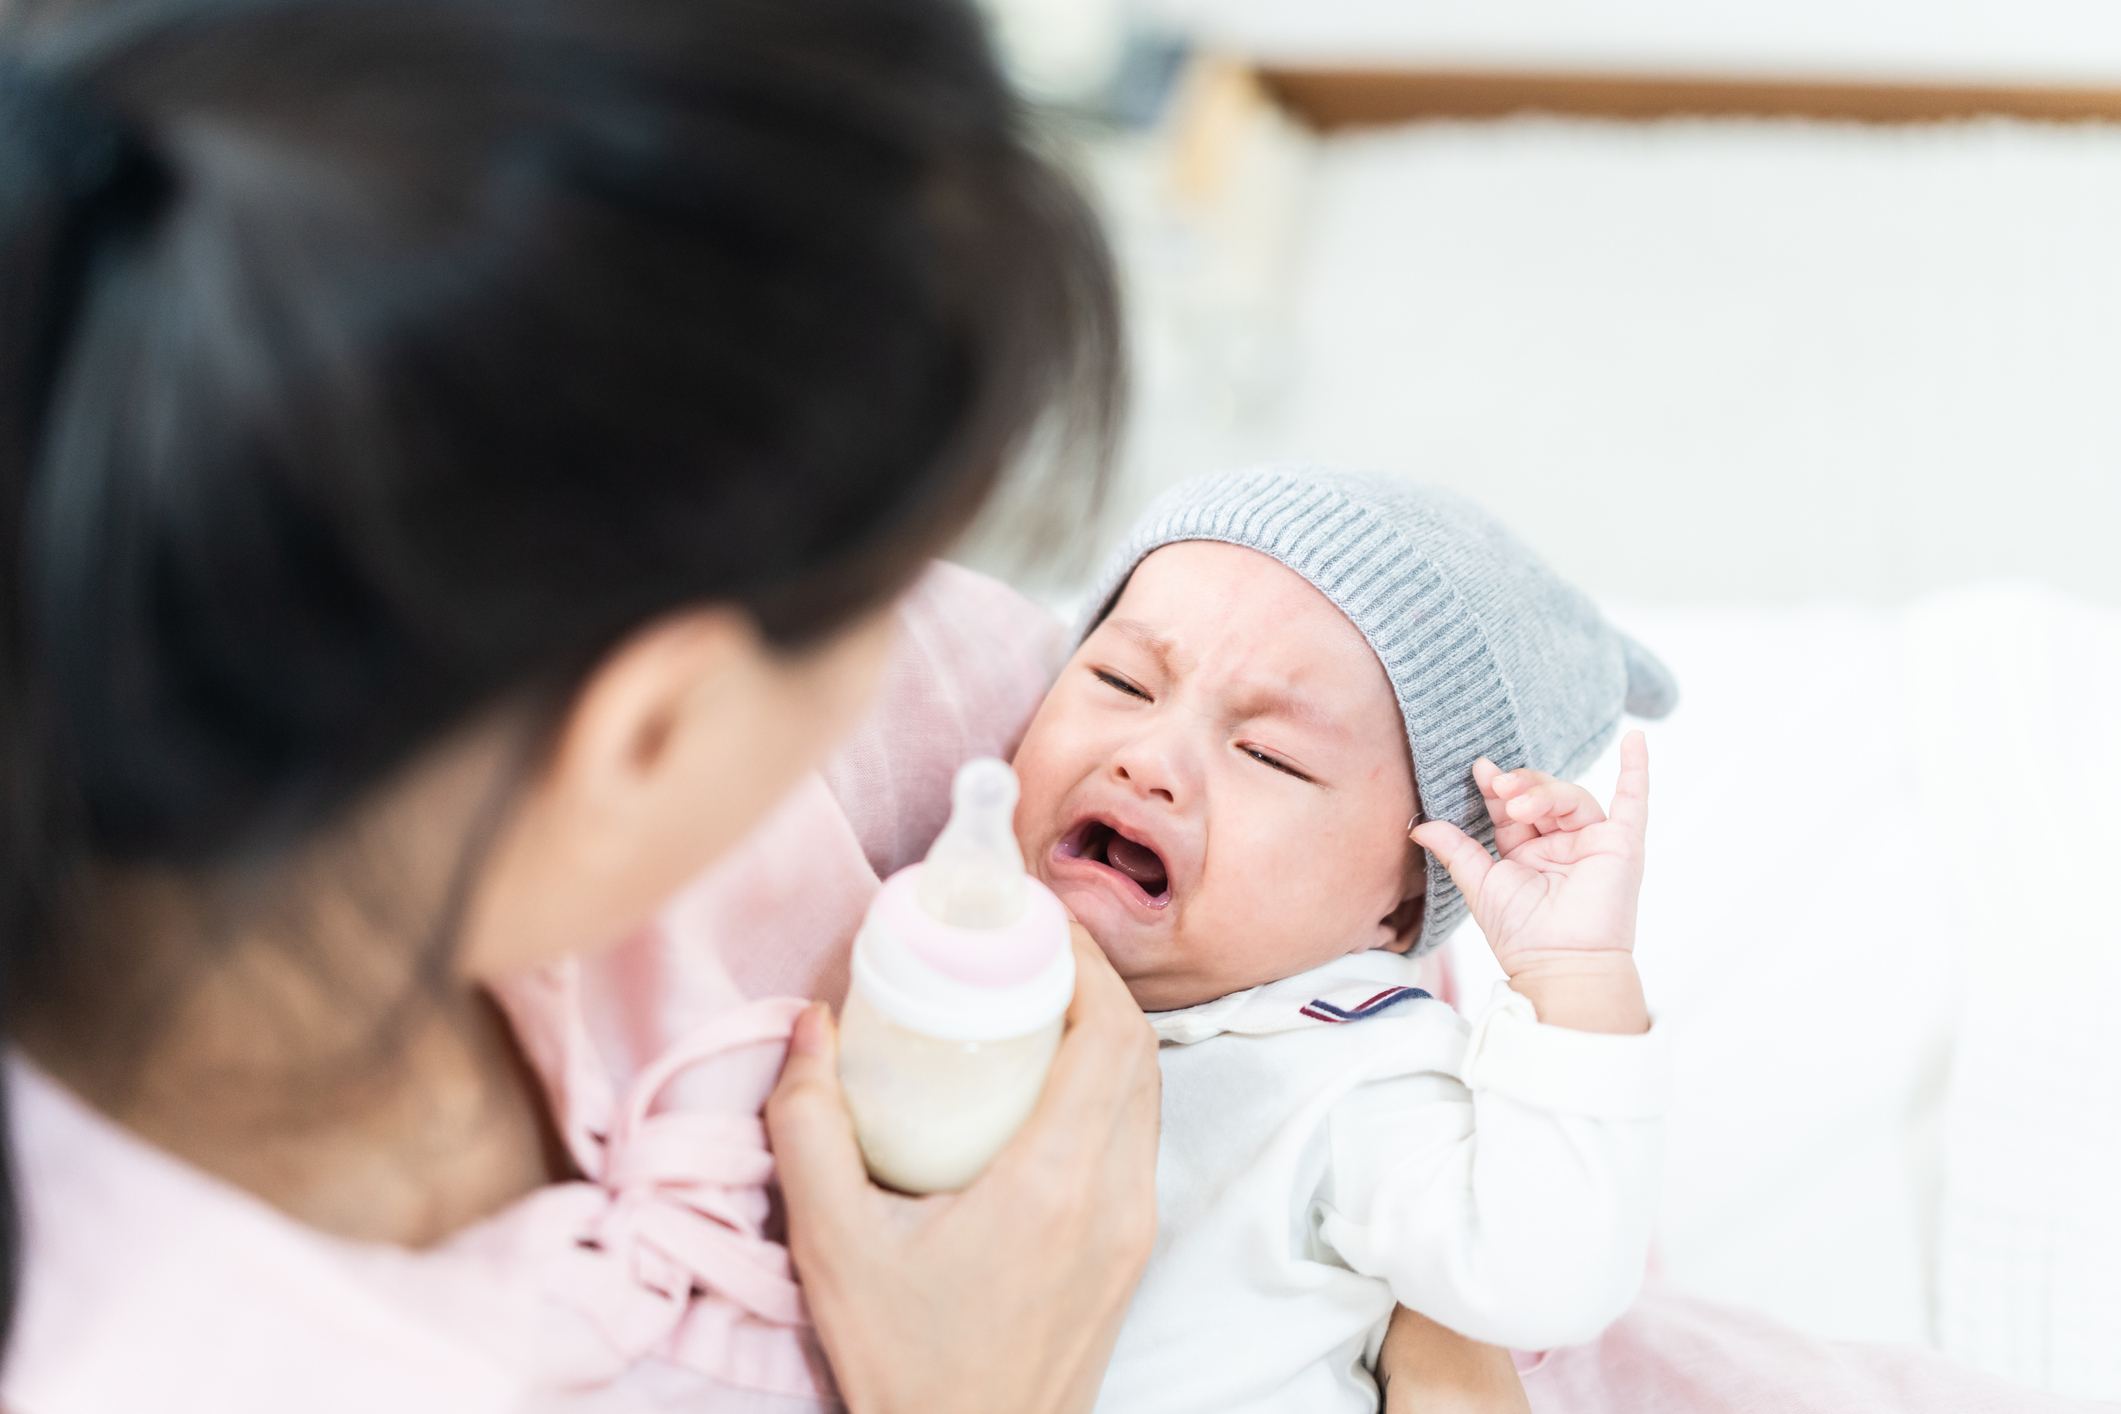 Soothe a Baby Crying While Bottle Feeding